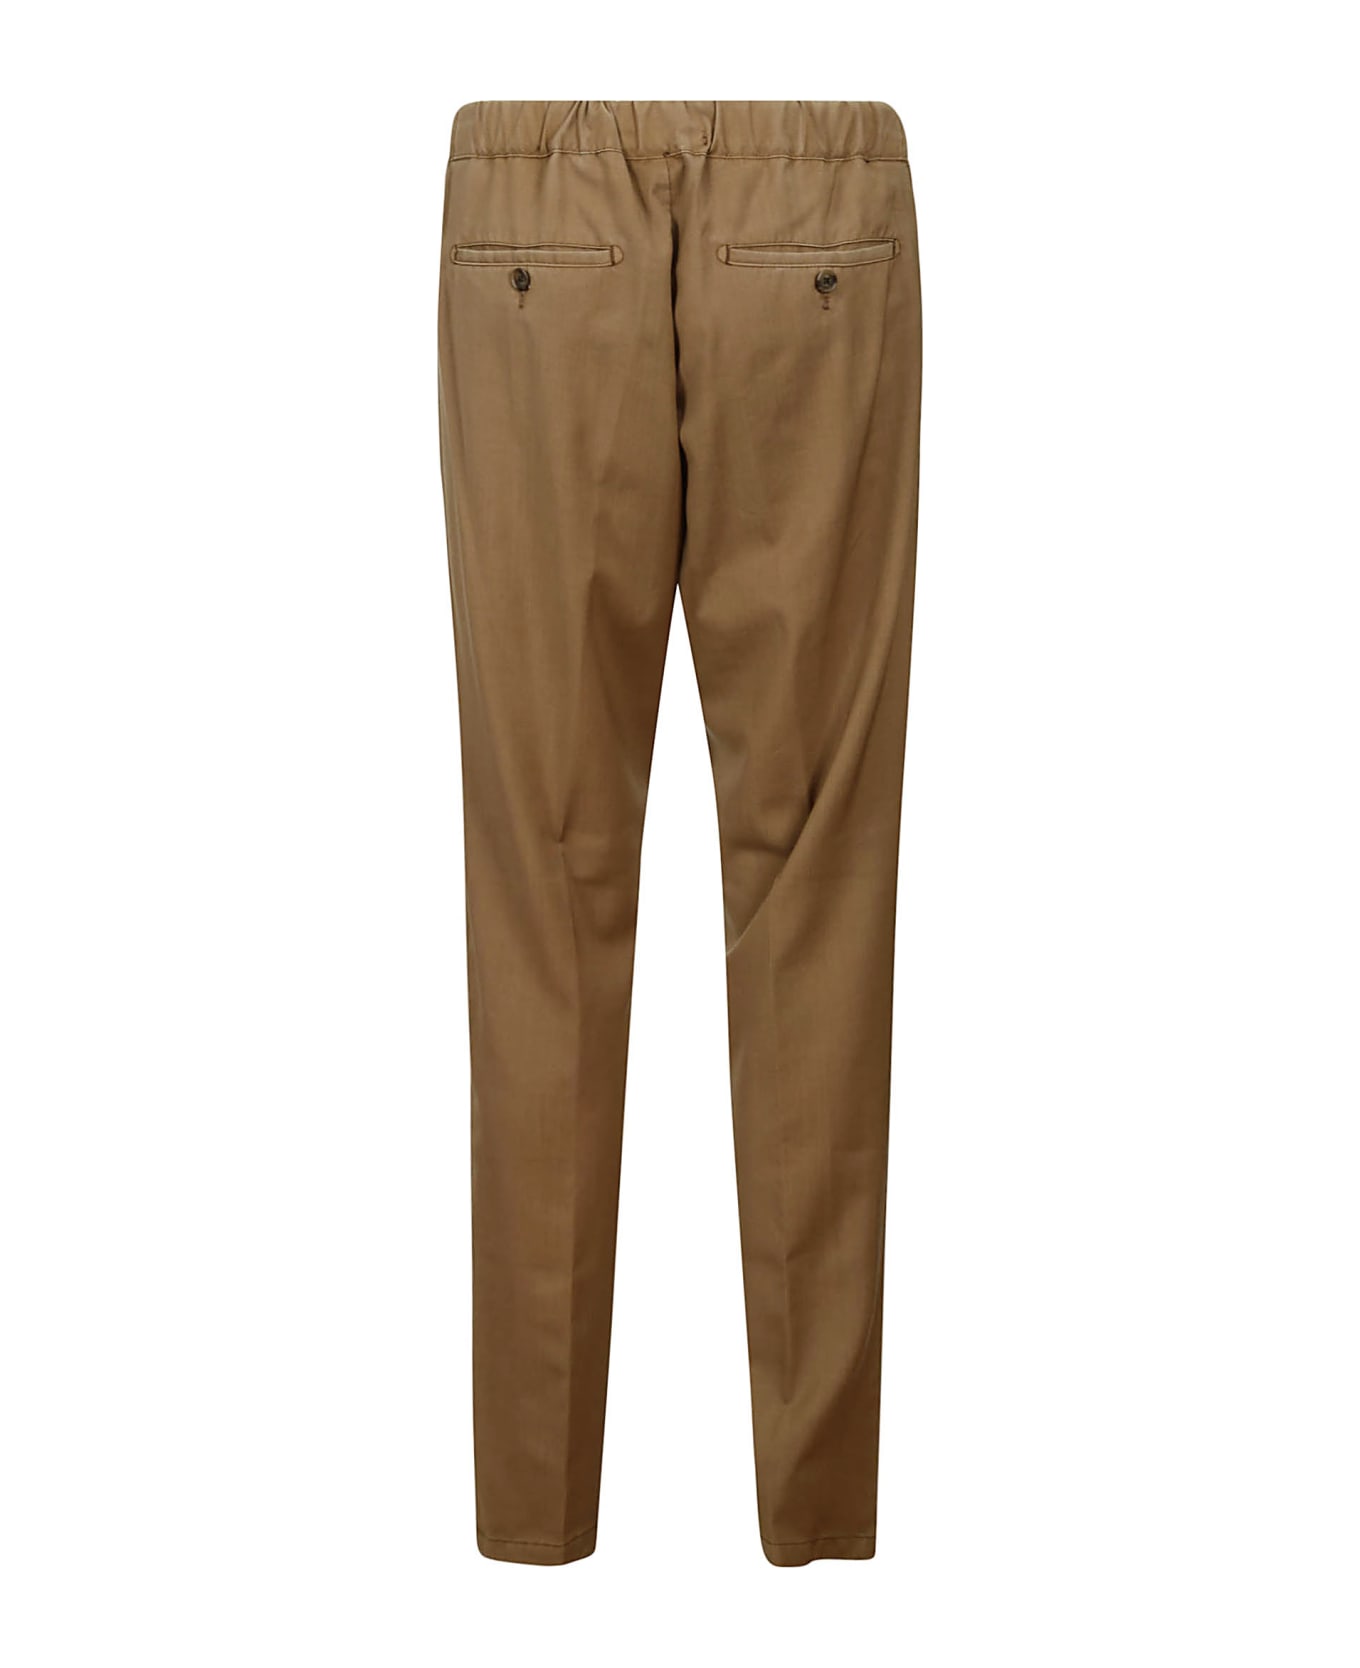 Myths Trousers - Beige